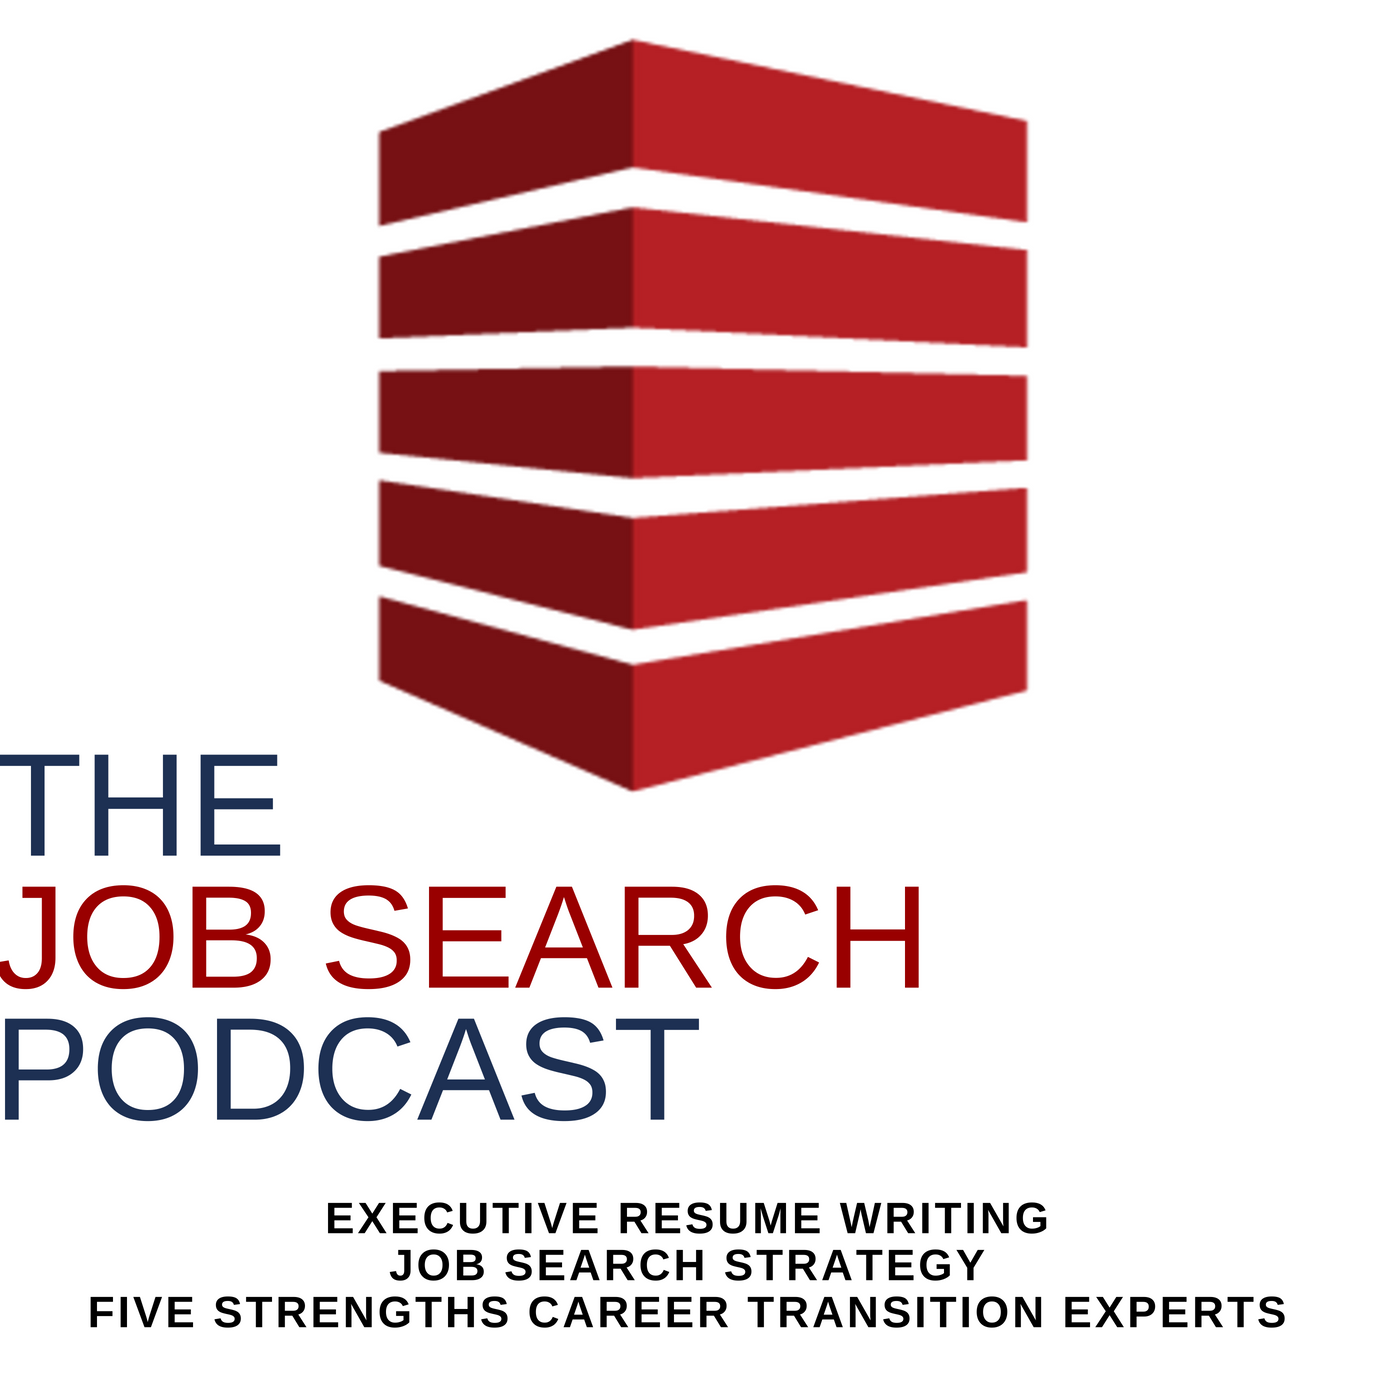 I Suspect Your LinkedIn Profile is Fake | The Job Search Podcast